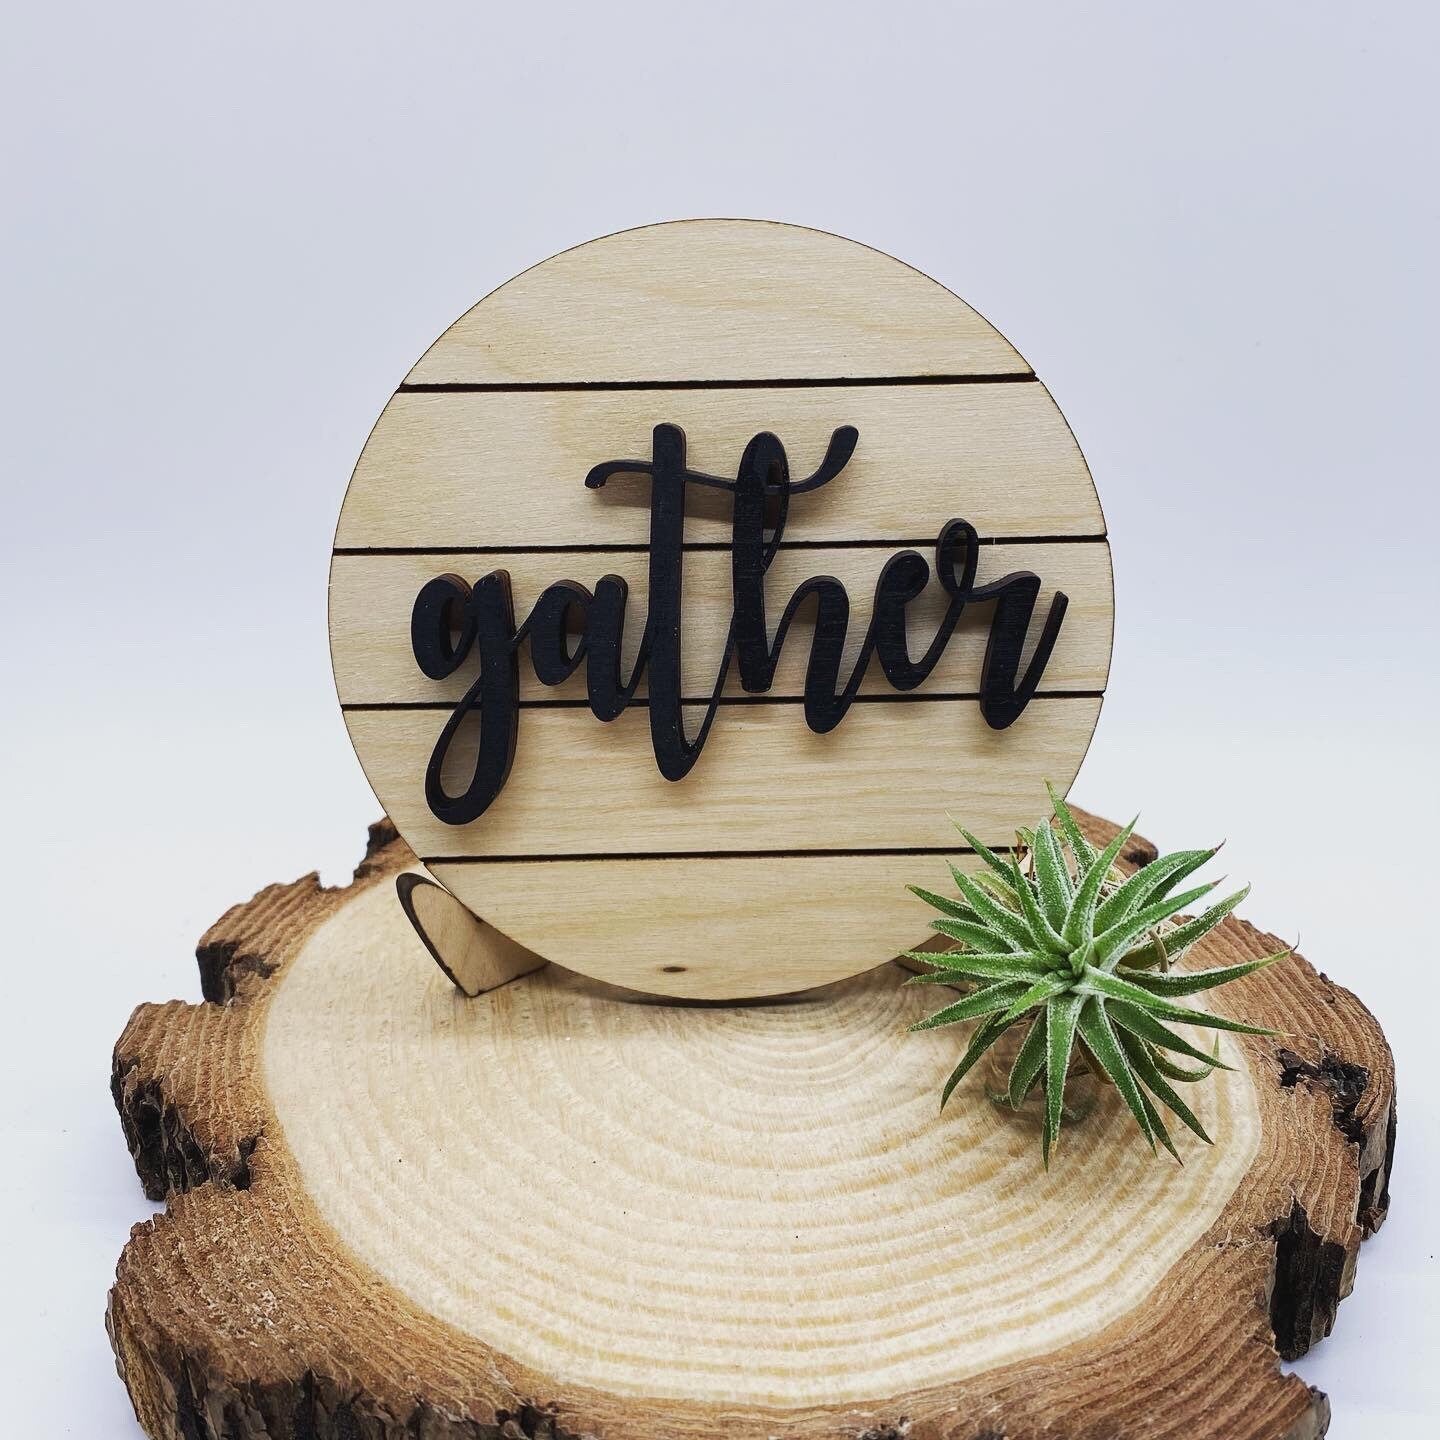 Gather Tiered Tray Sign, Shiplap Inspired Tray Sign, Tiered Tray Decor, 4” Round Tiered Tray Sign, Wood Tiered Tray Sign, Tiered Tray